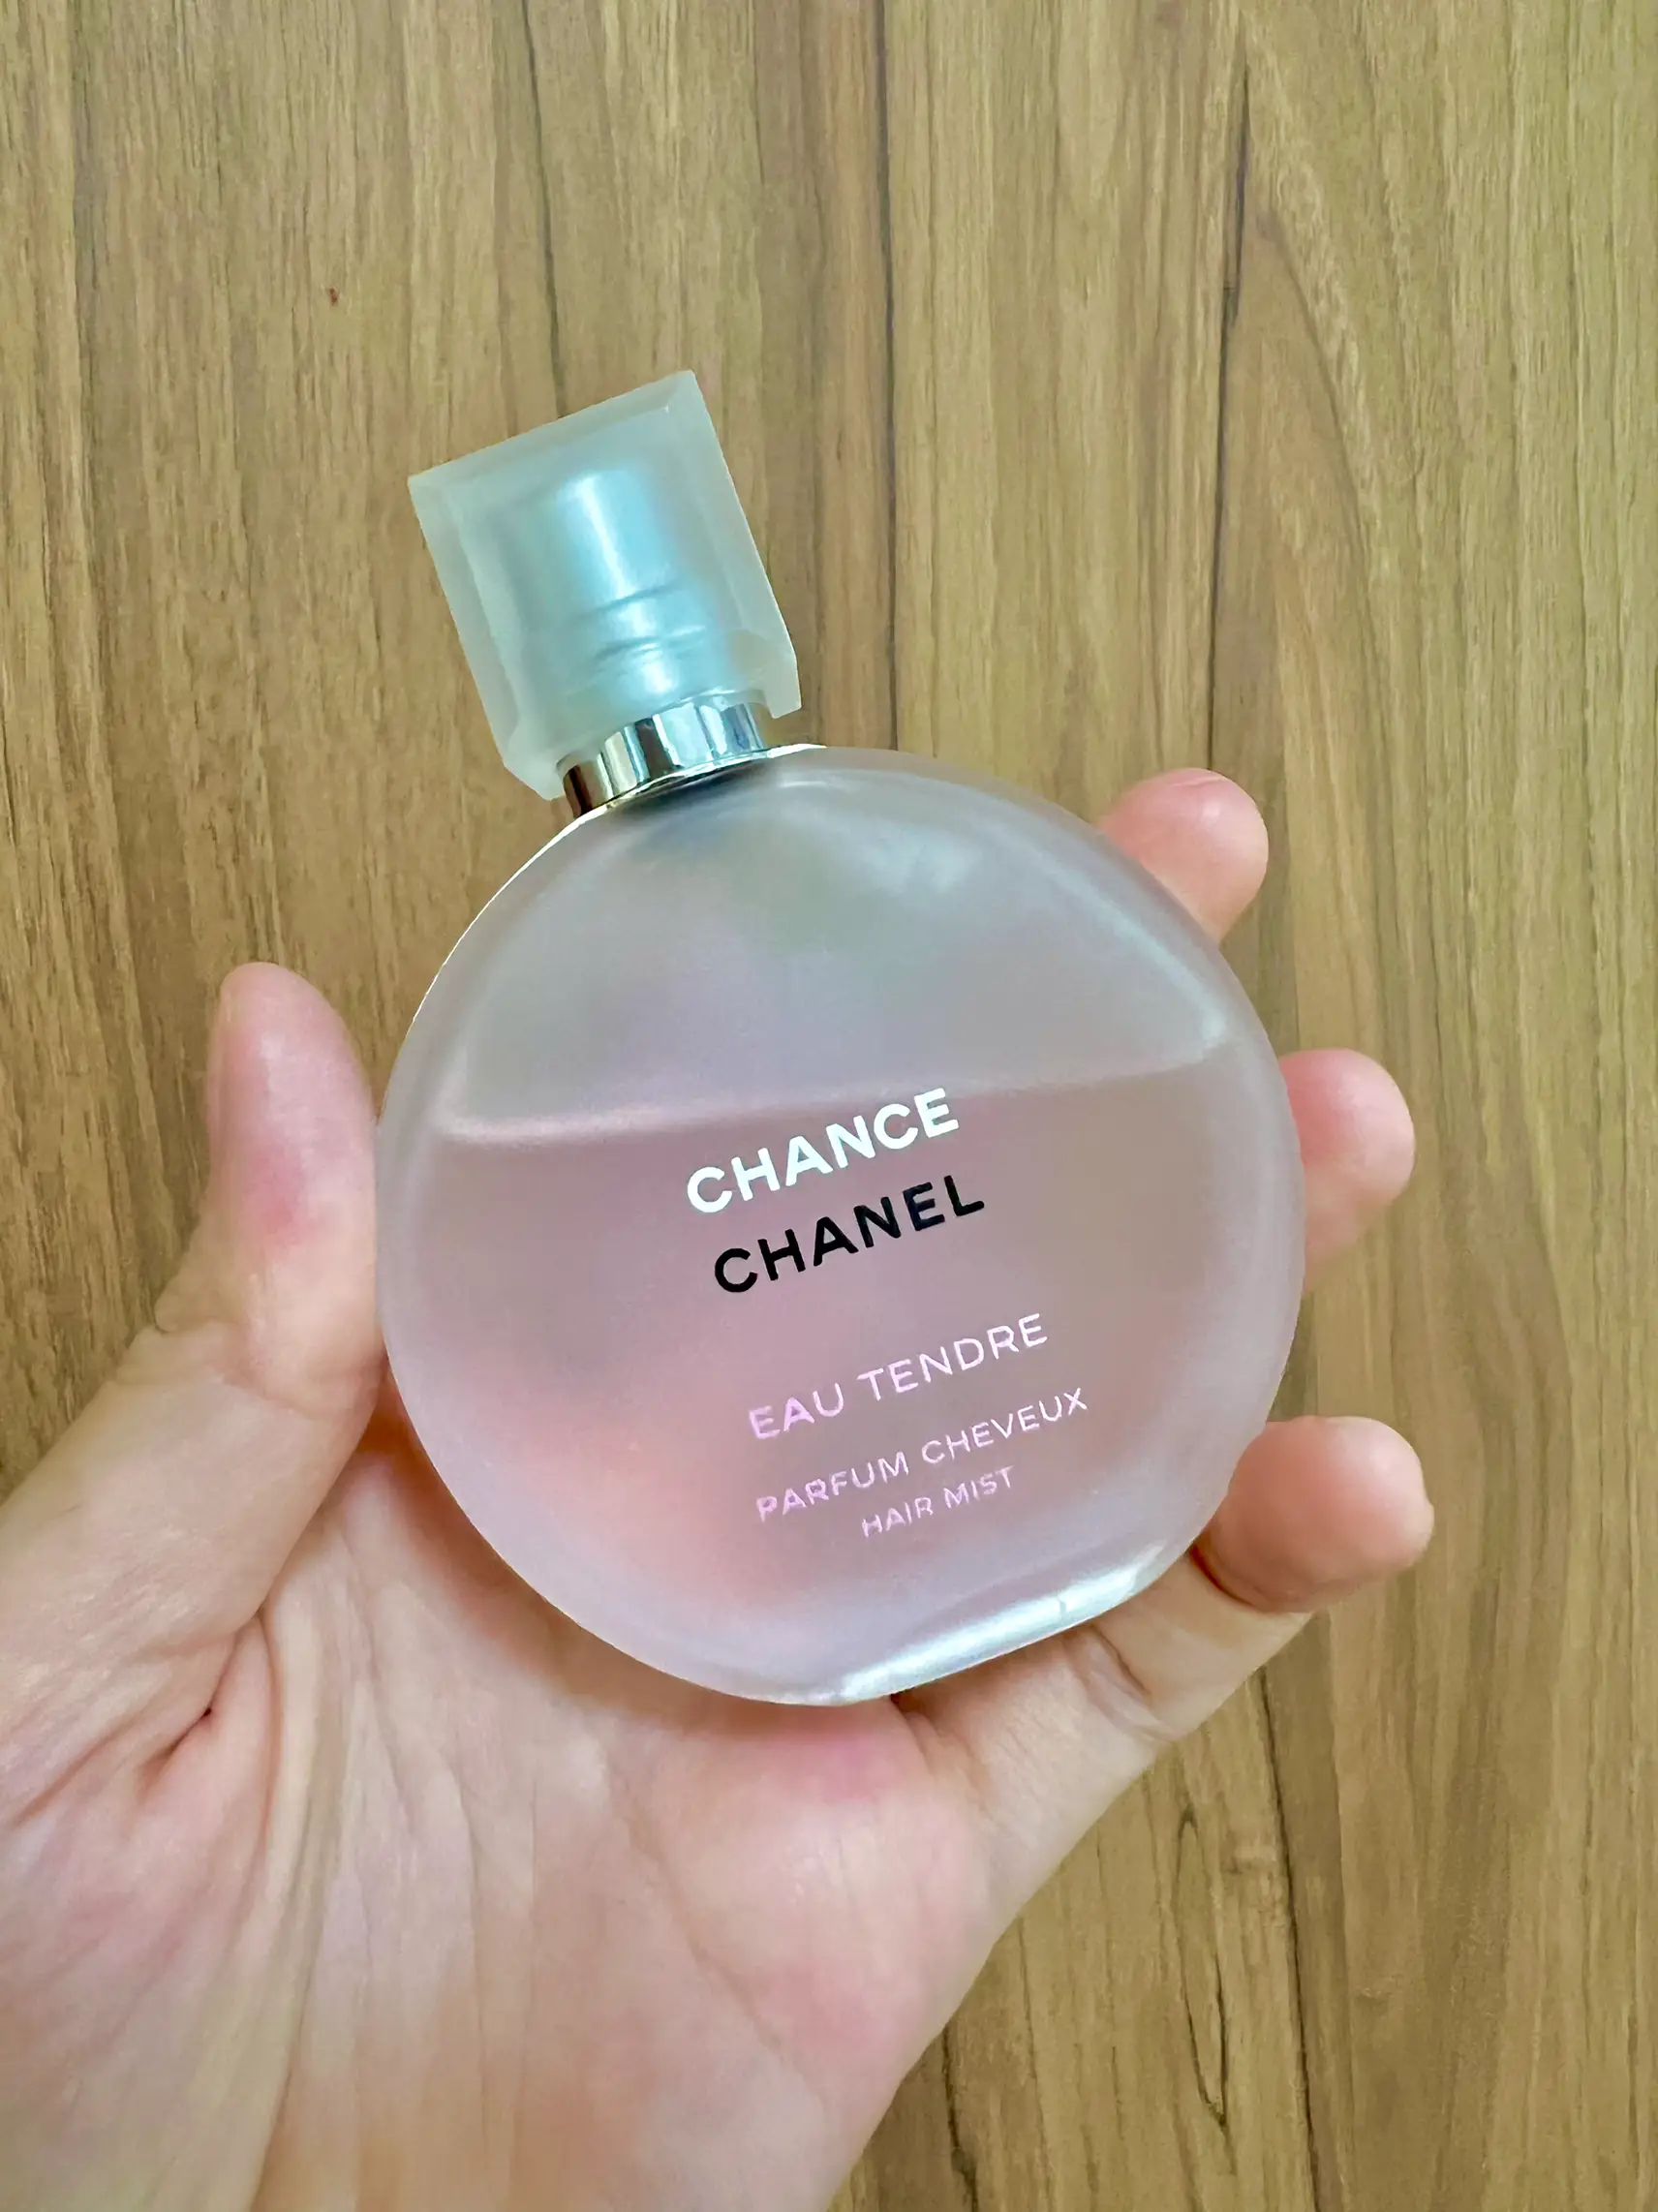 CHANEL CHANCE EAU TENDRE, Gallery posted by Borbell